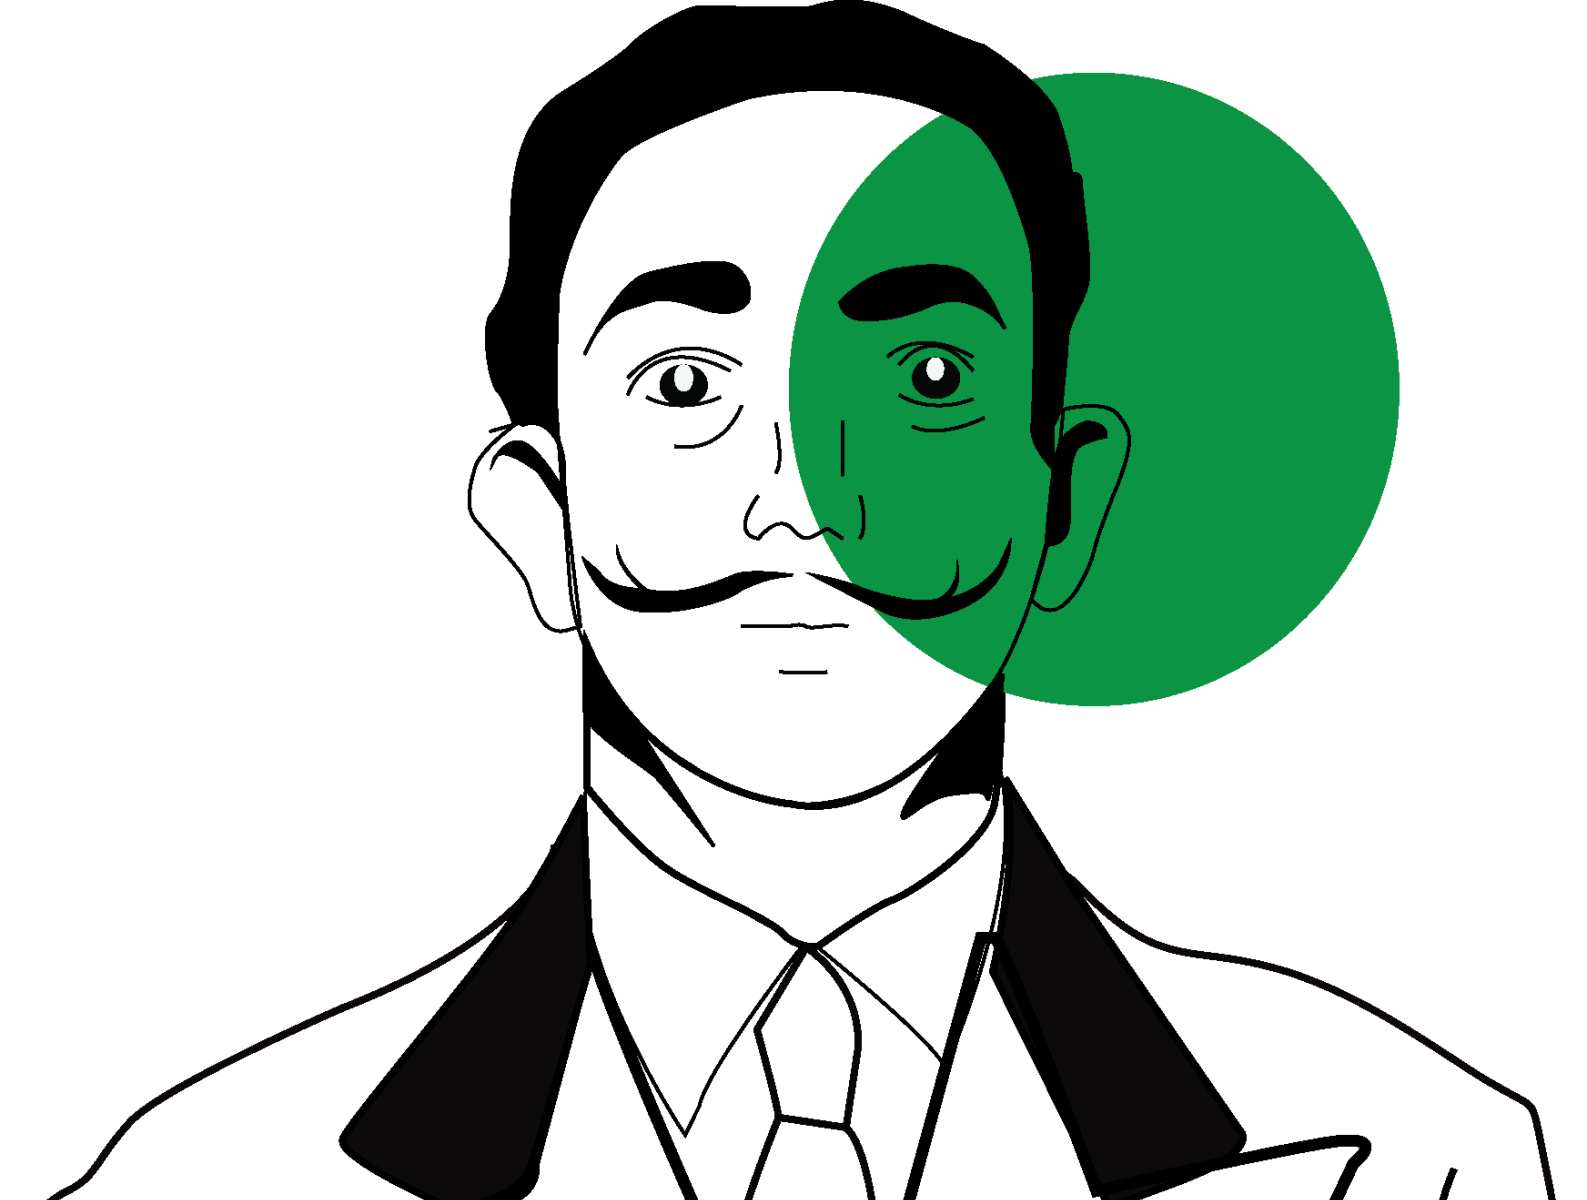 Salvordor dali by SpoofRoom on Dribbble